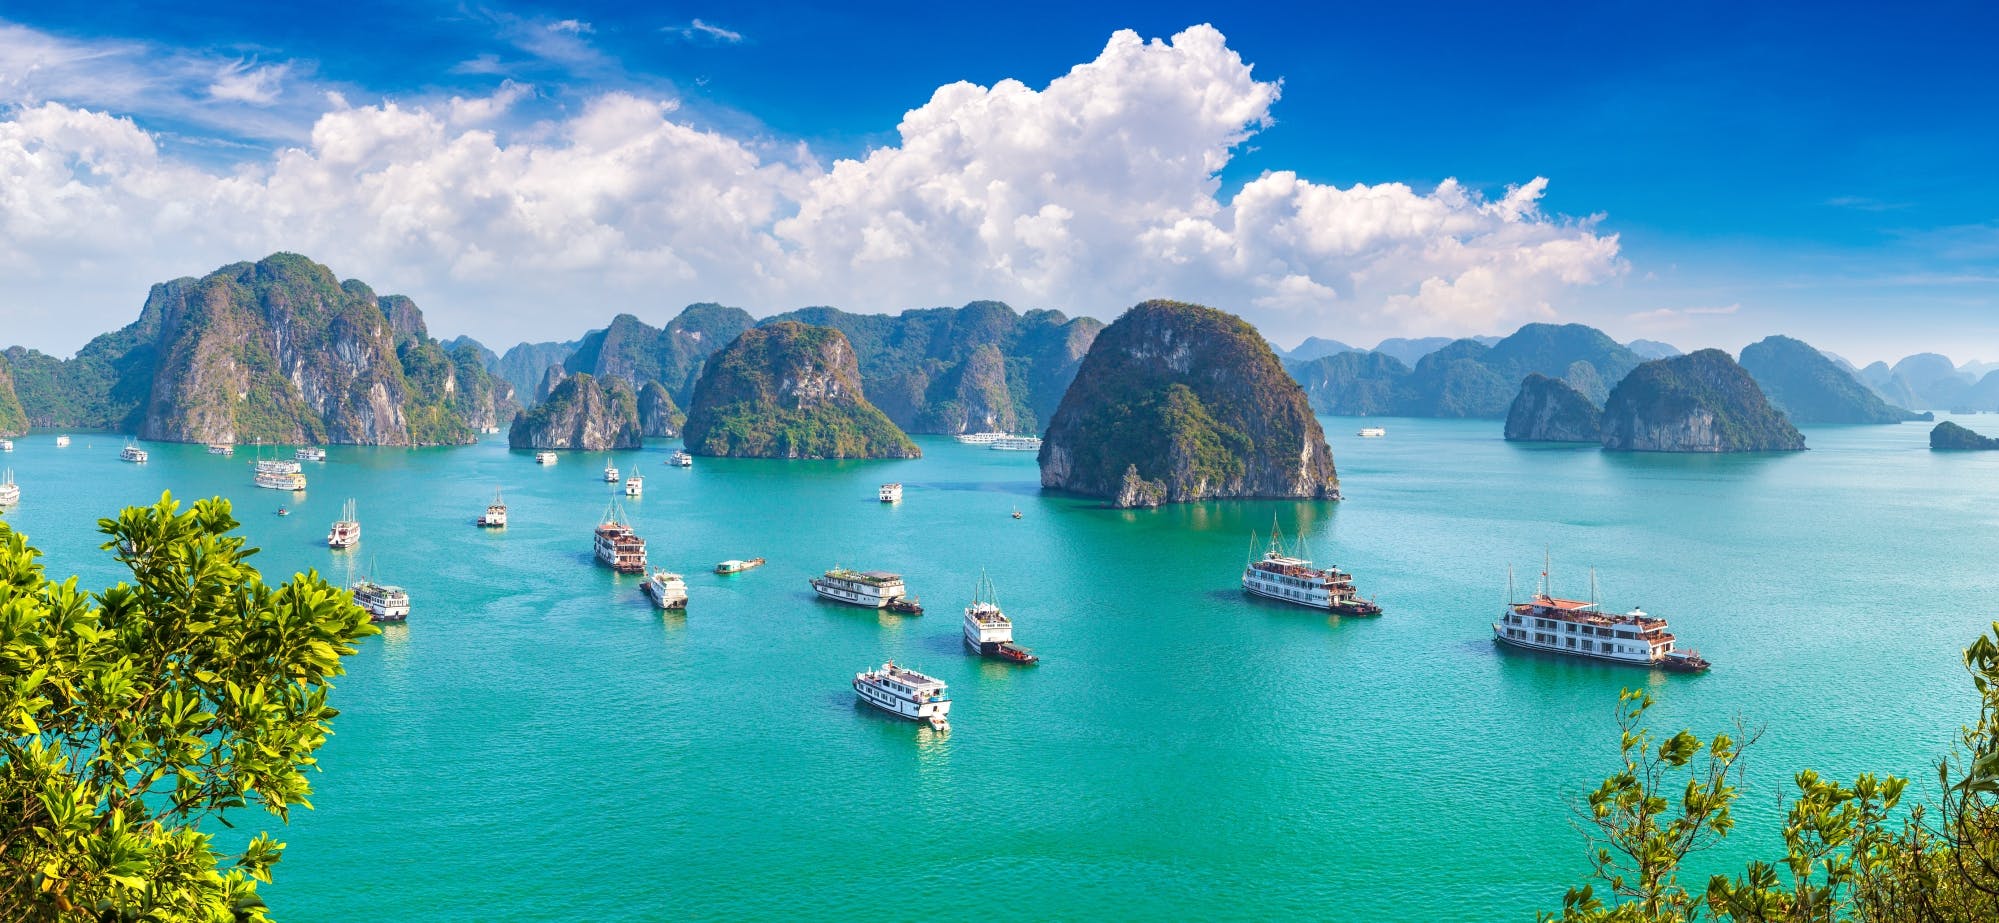 Halong Bay full day excursion from Hanoi Musement